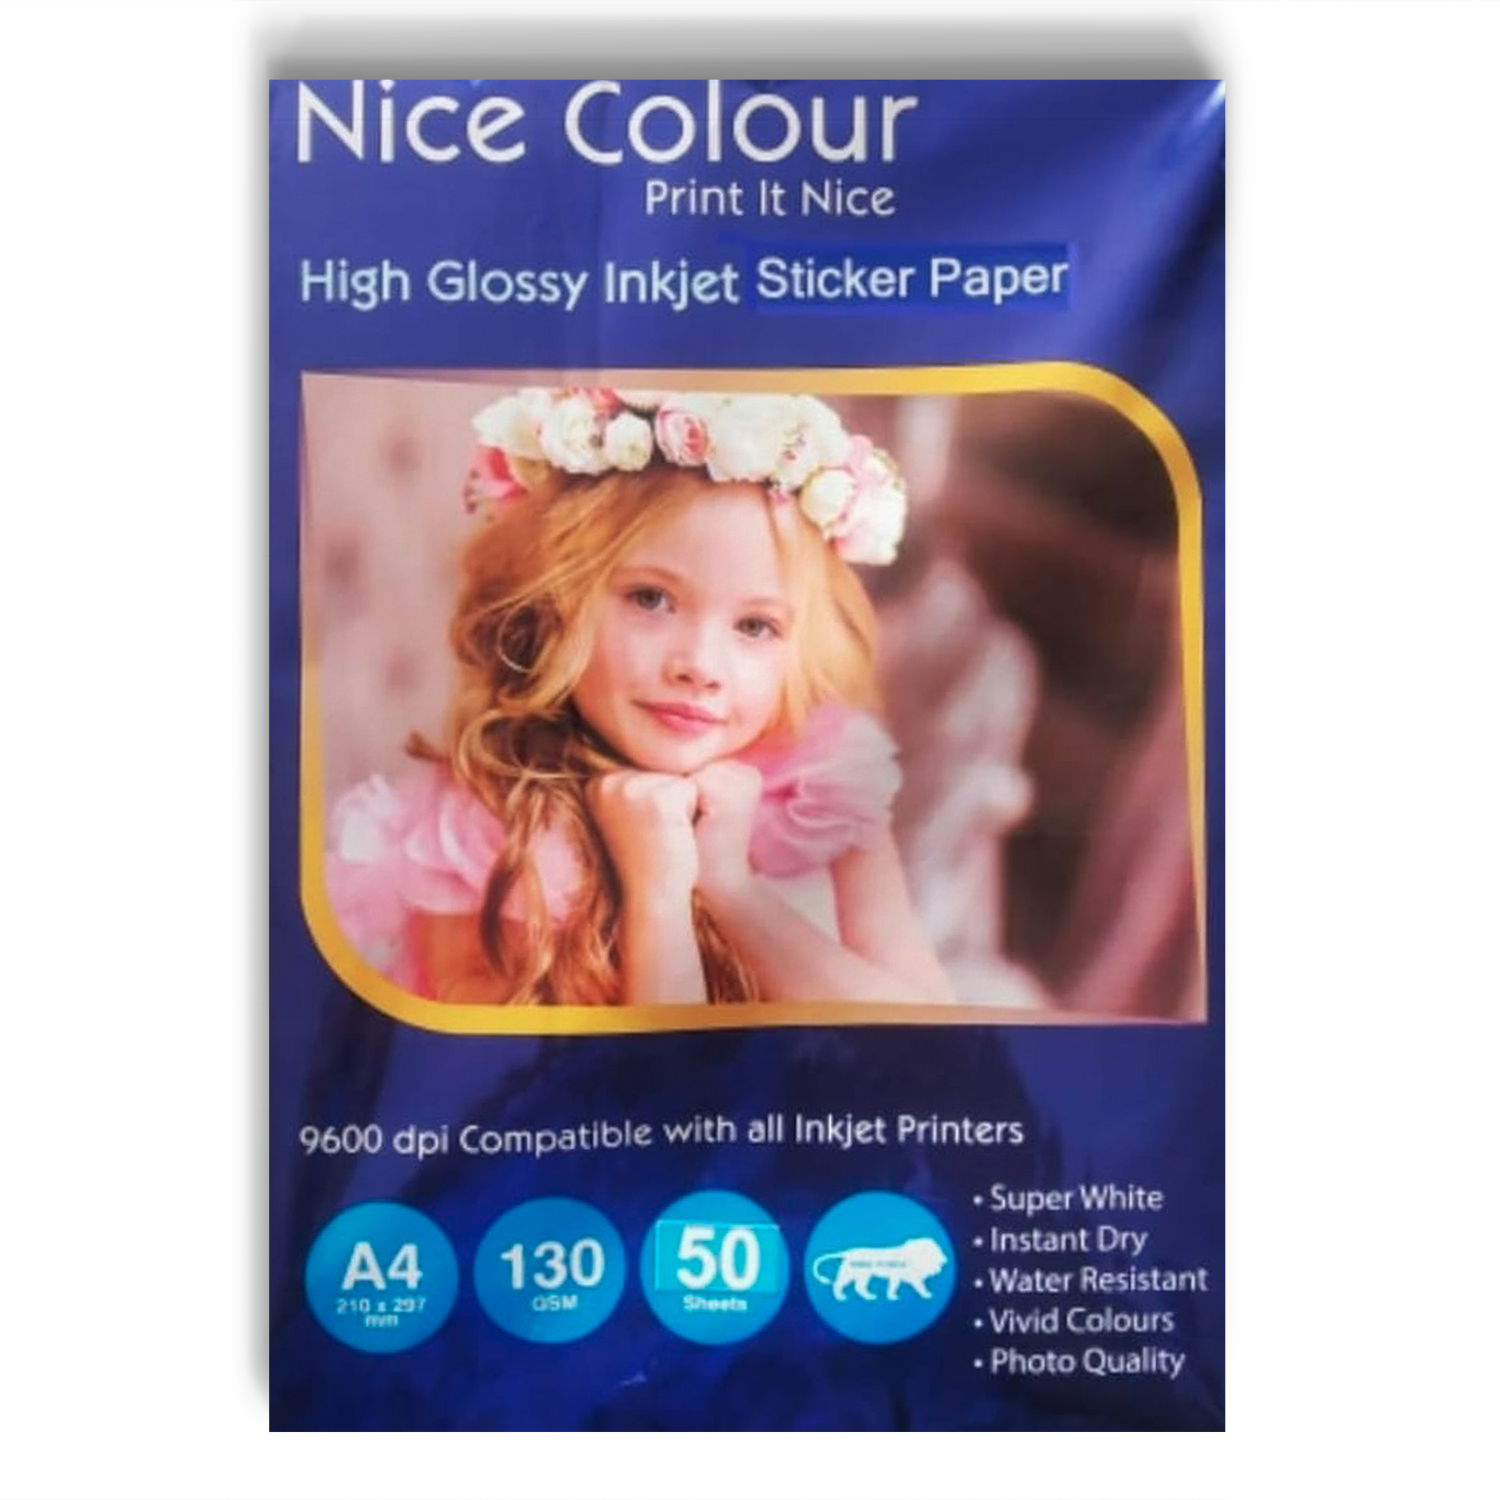 A4 High Glossy Sticker Paper 130gsm 50 Sheets